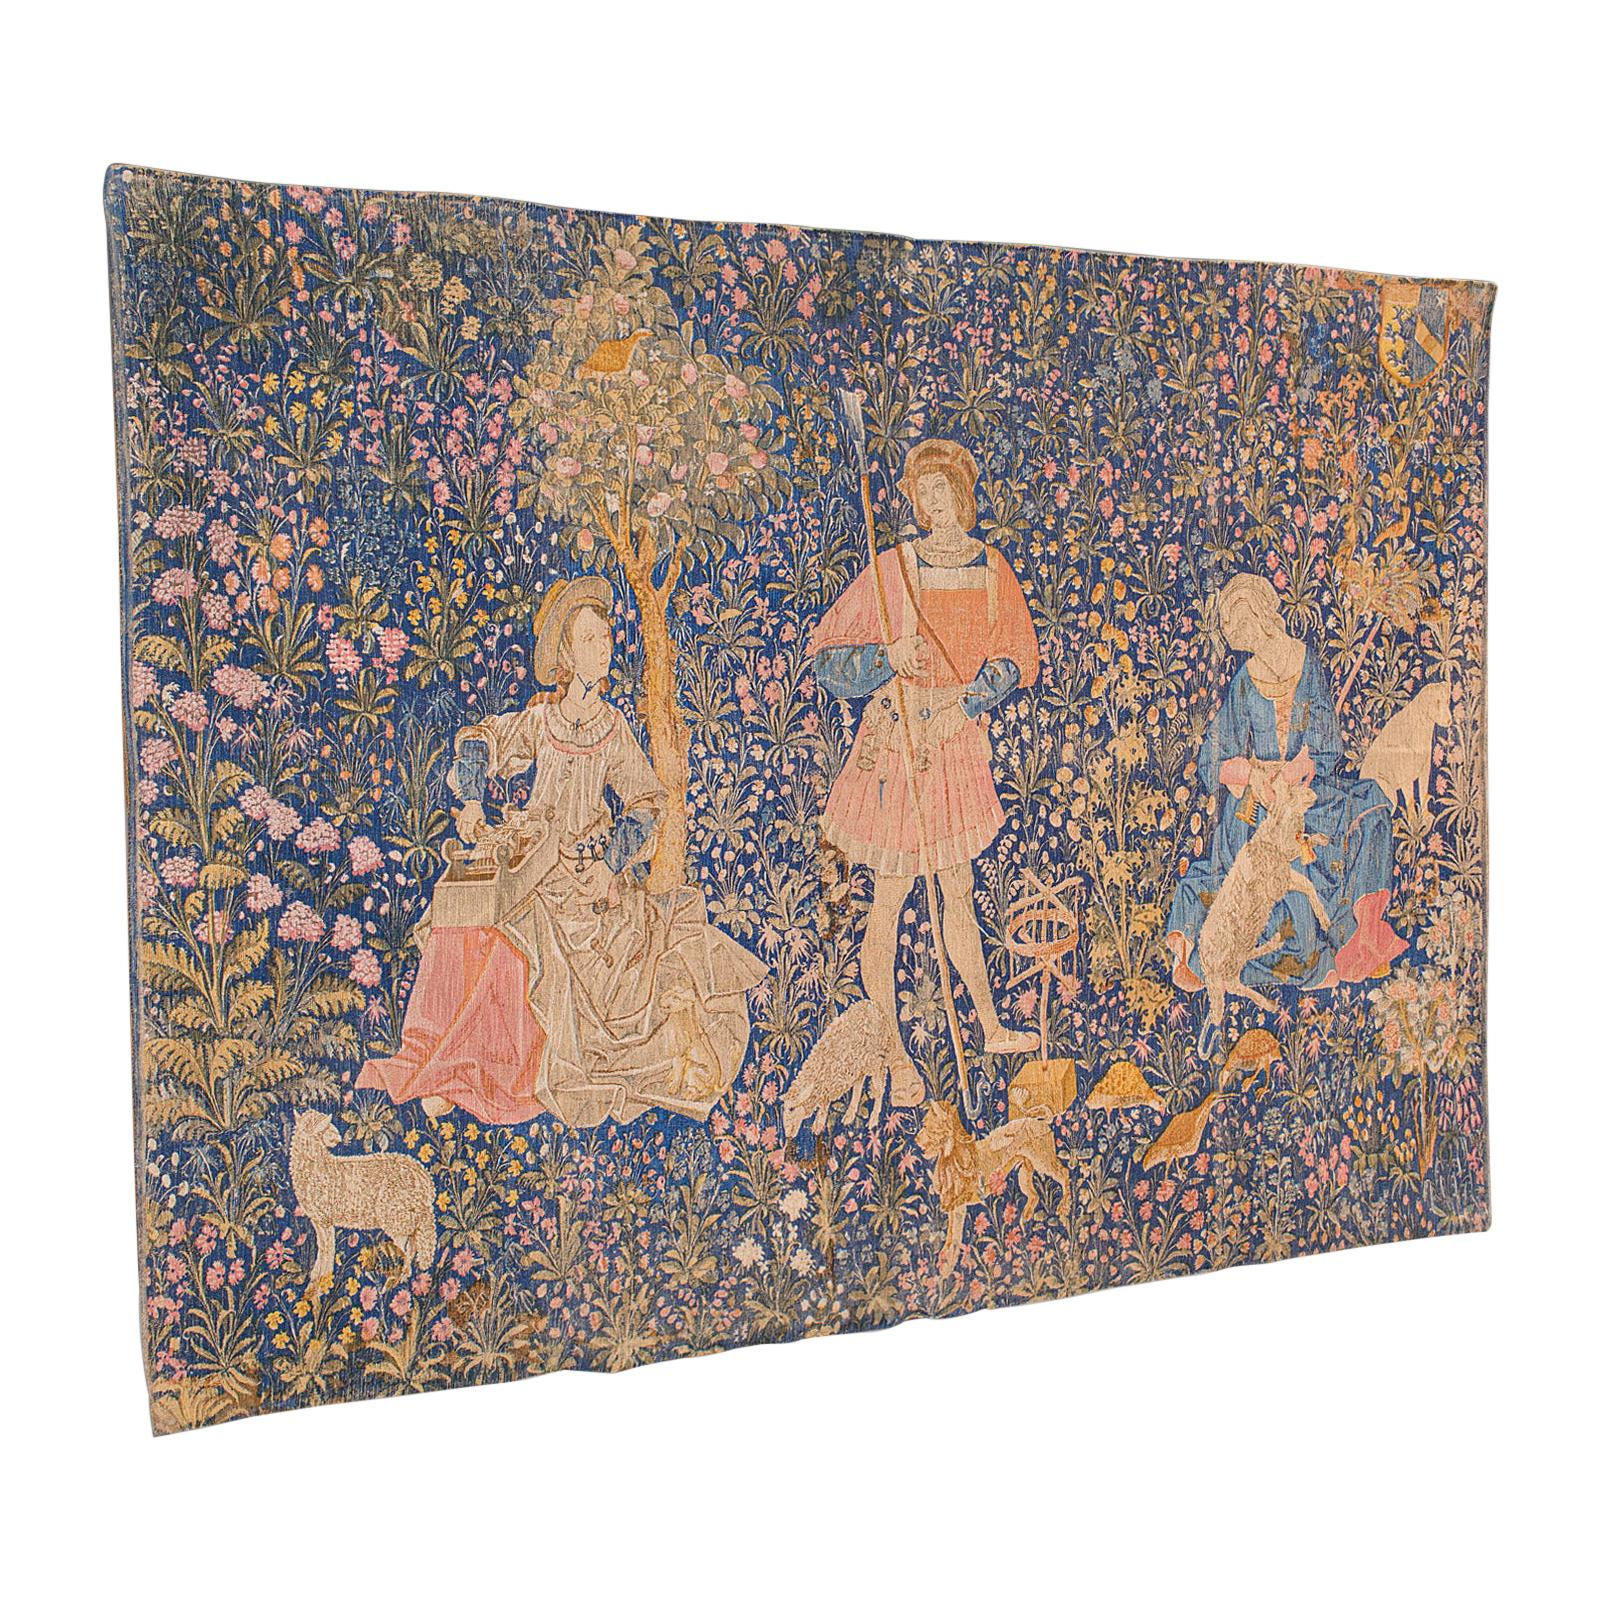 Large Antique Tapestry, French, Needlepoint, Decorative Wall Covering, C.1920